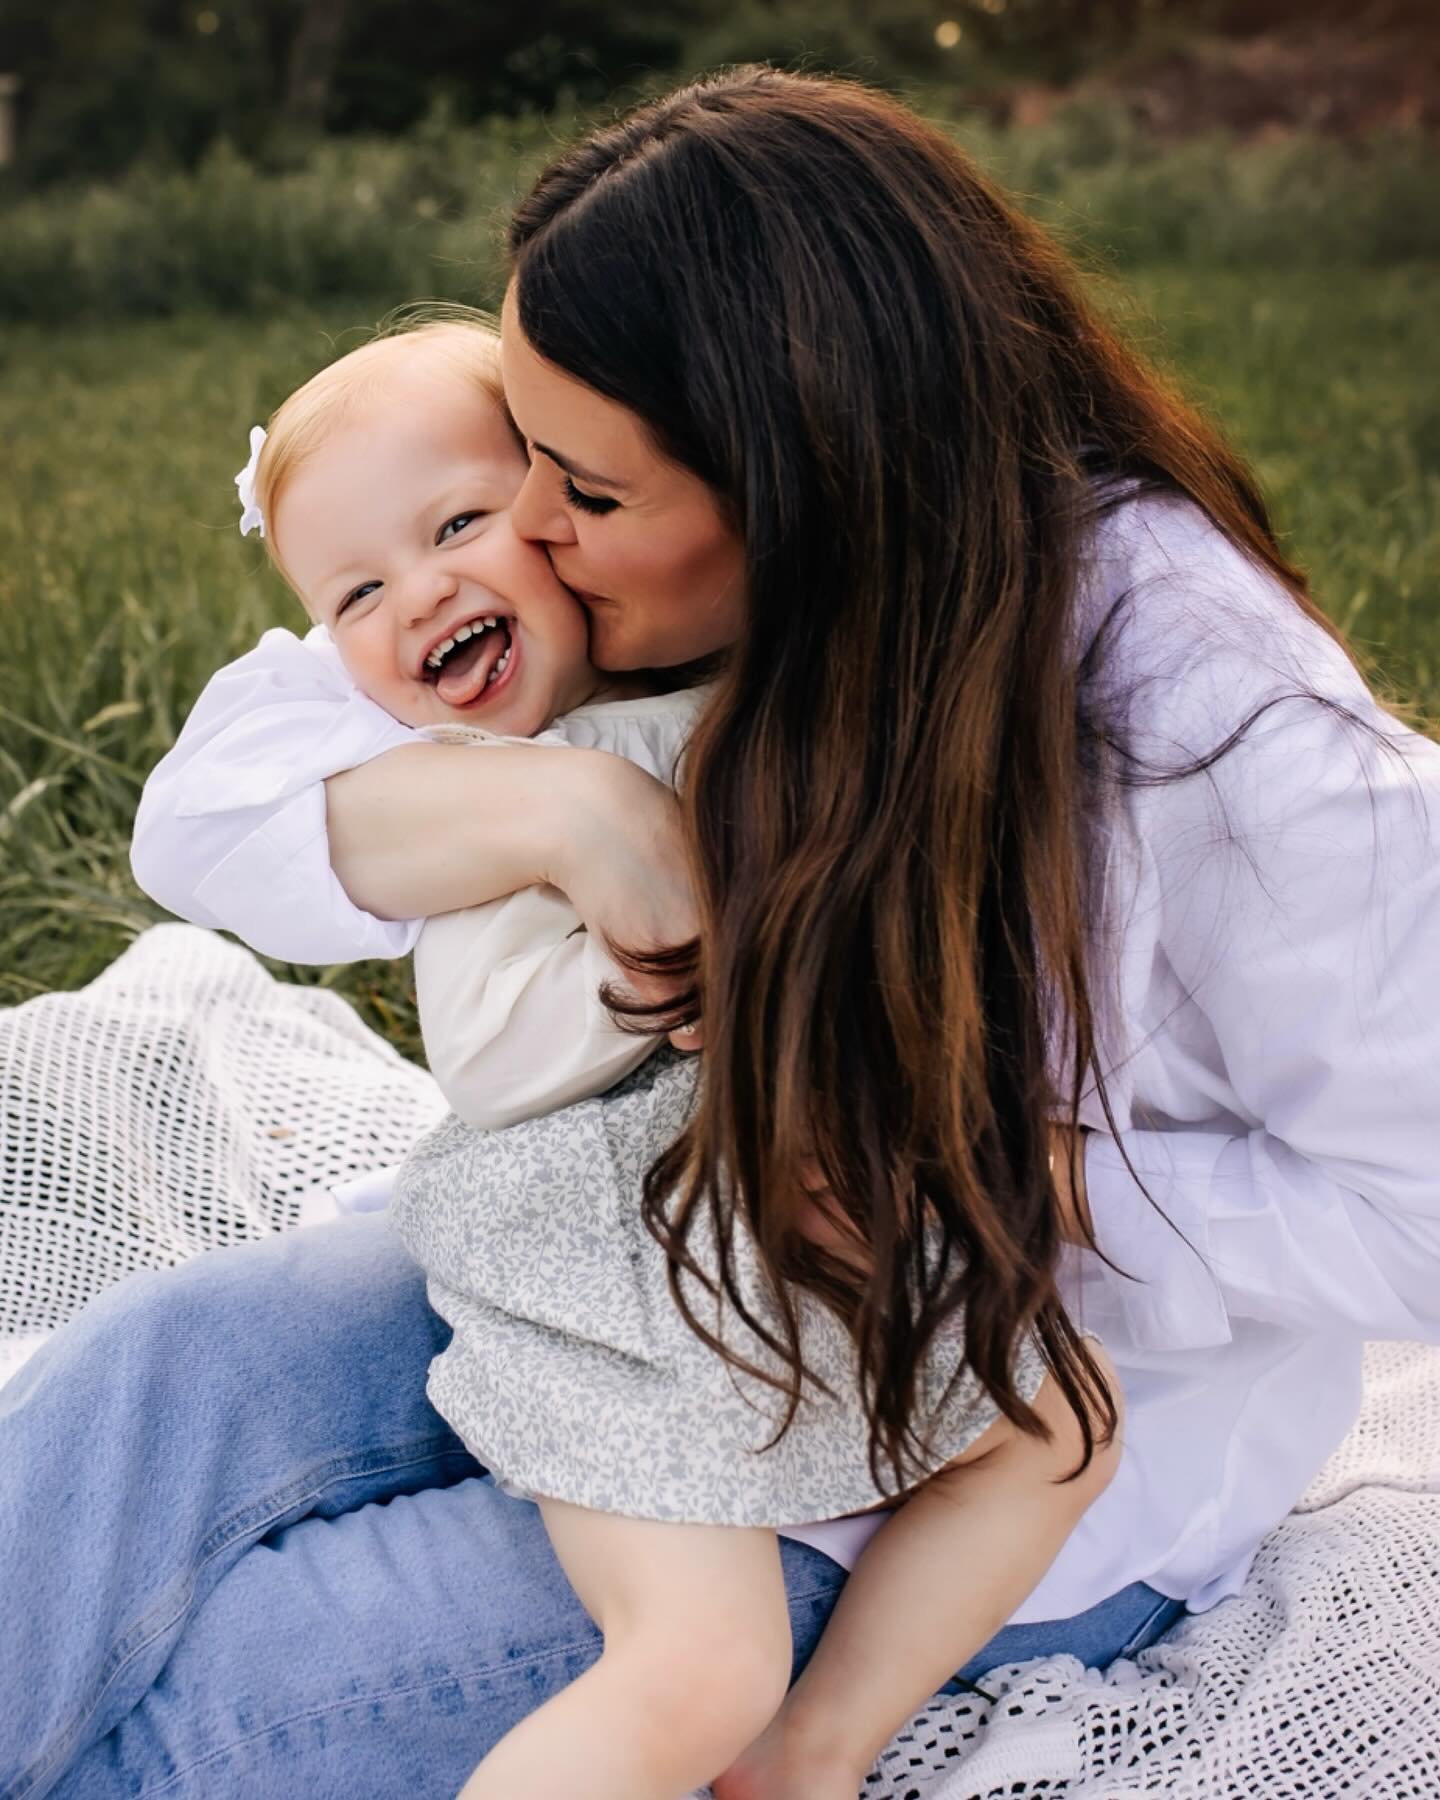 All the mama love in this post. 🥰

Also, this little cutie&rsquo;s smile was so infectious. How cute is she?! 

Happy Mother&rsquo;s Day weekend to all 💞
.
.
.
.
#morristownnj #morristownnjphotographer #morristownfamilyphotographer #mothersday #cli